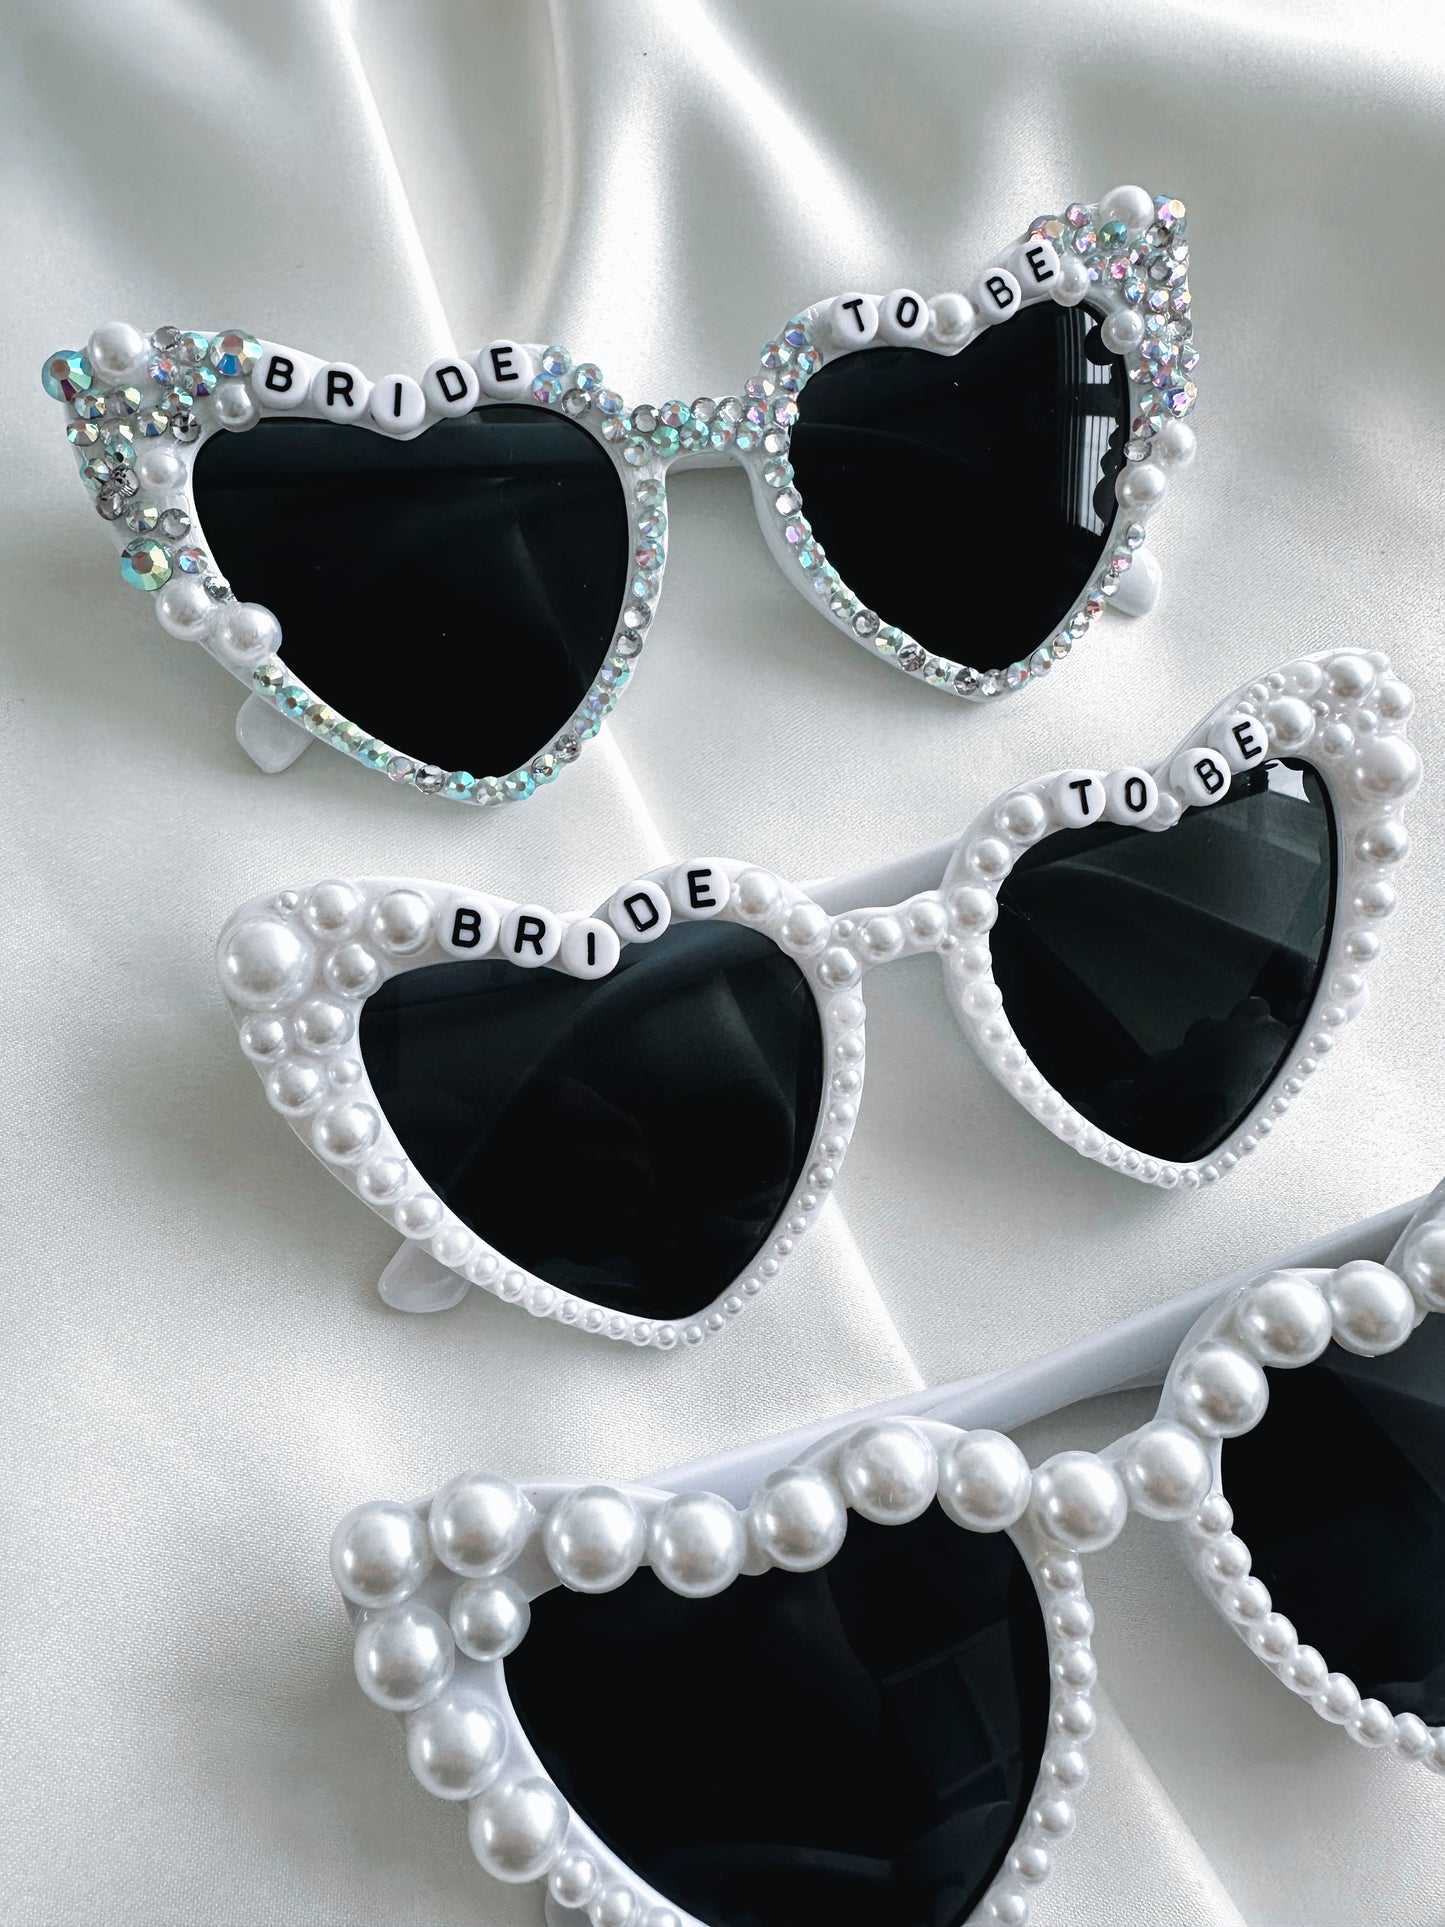 Bride To Be Pearl Heart Shaped Sunglasses